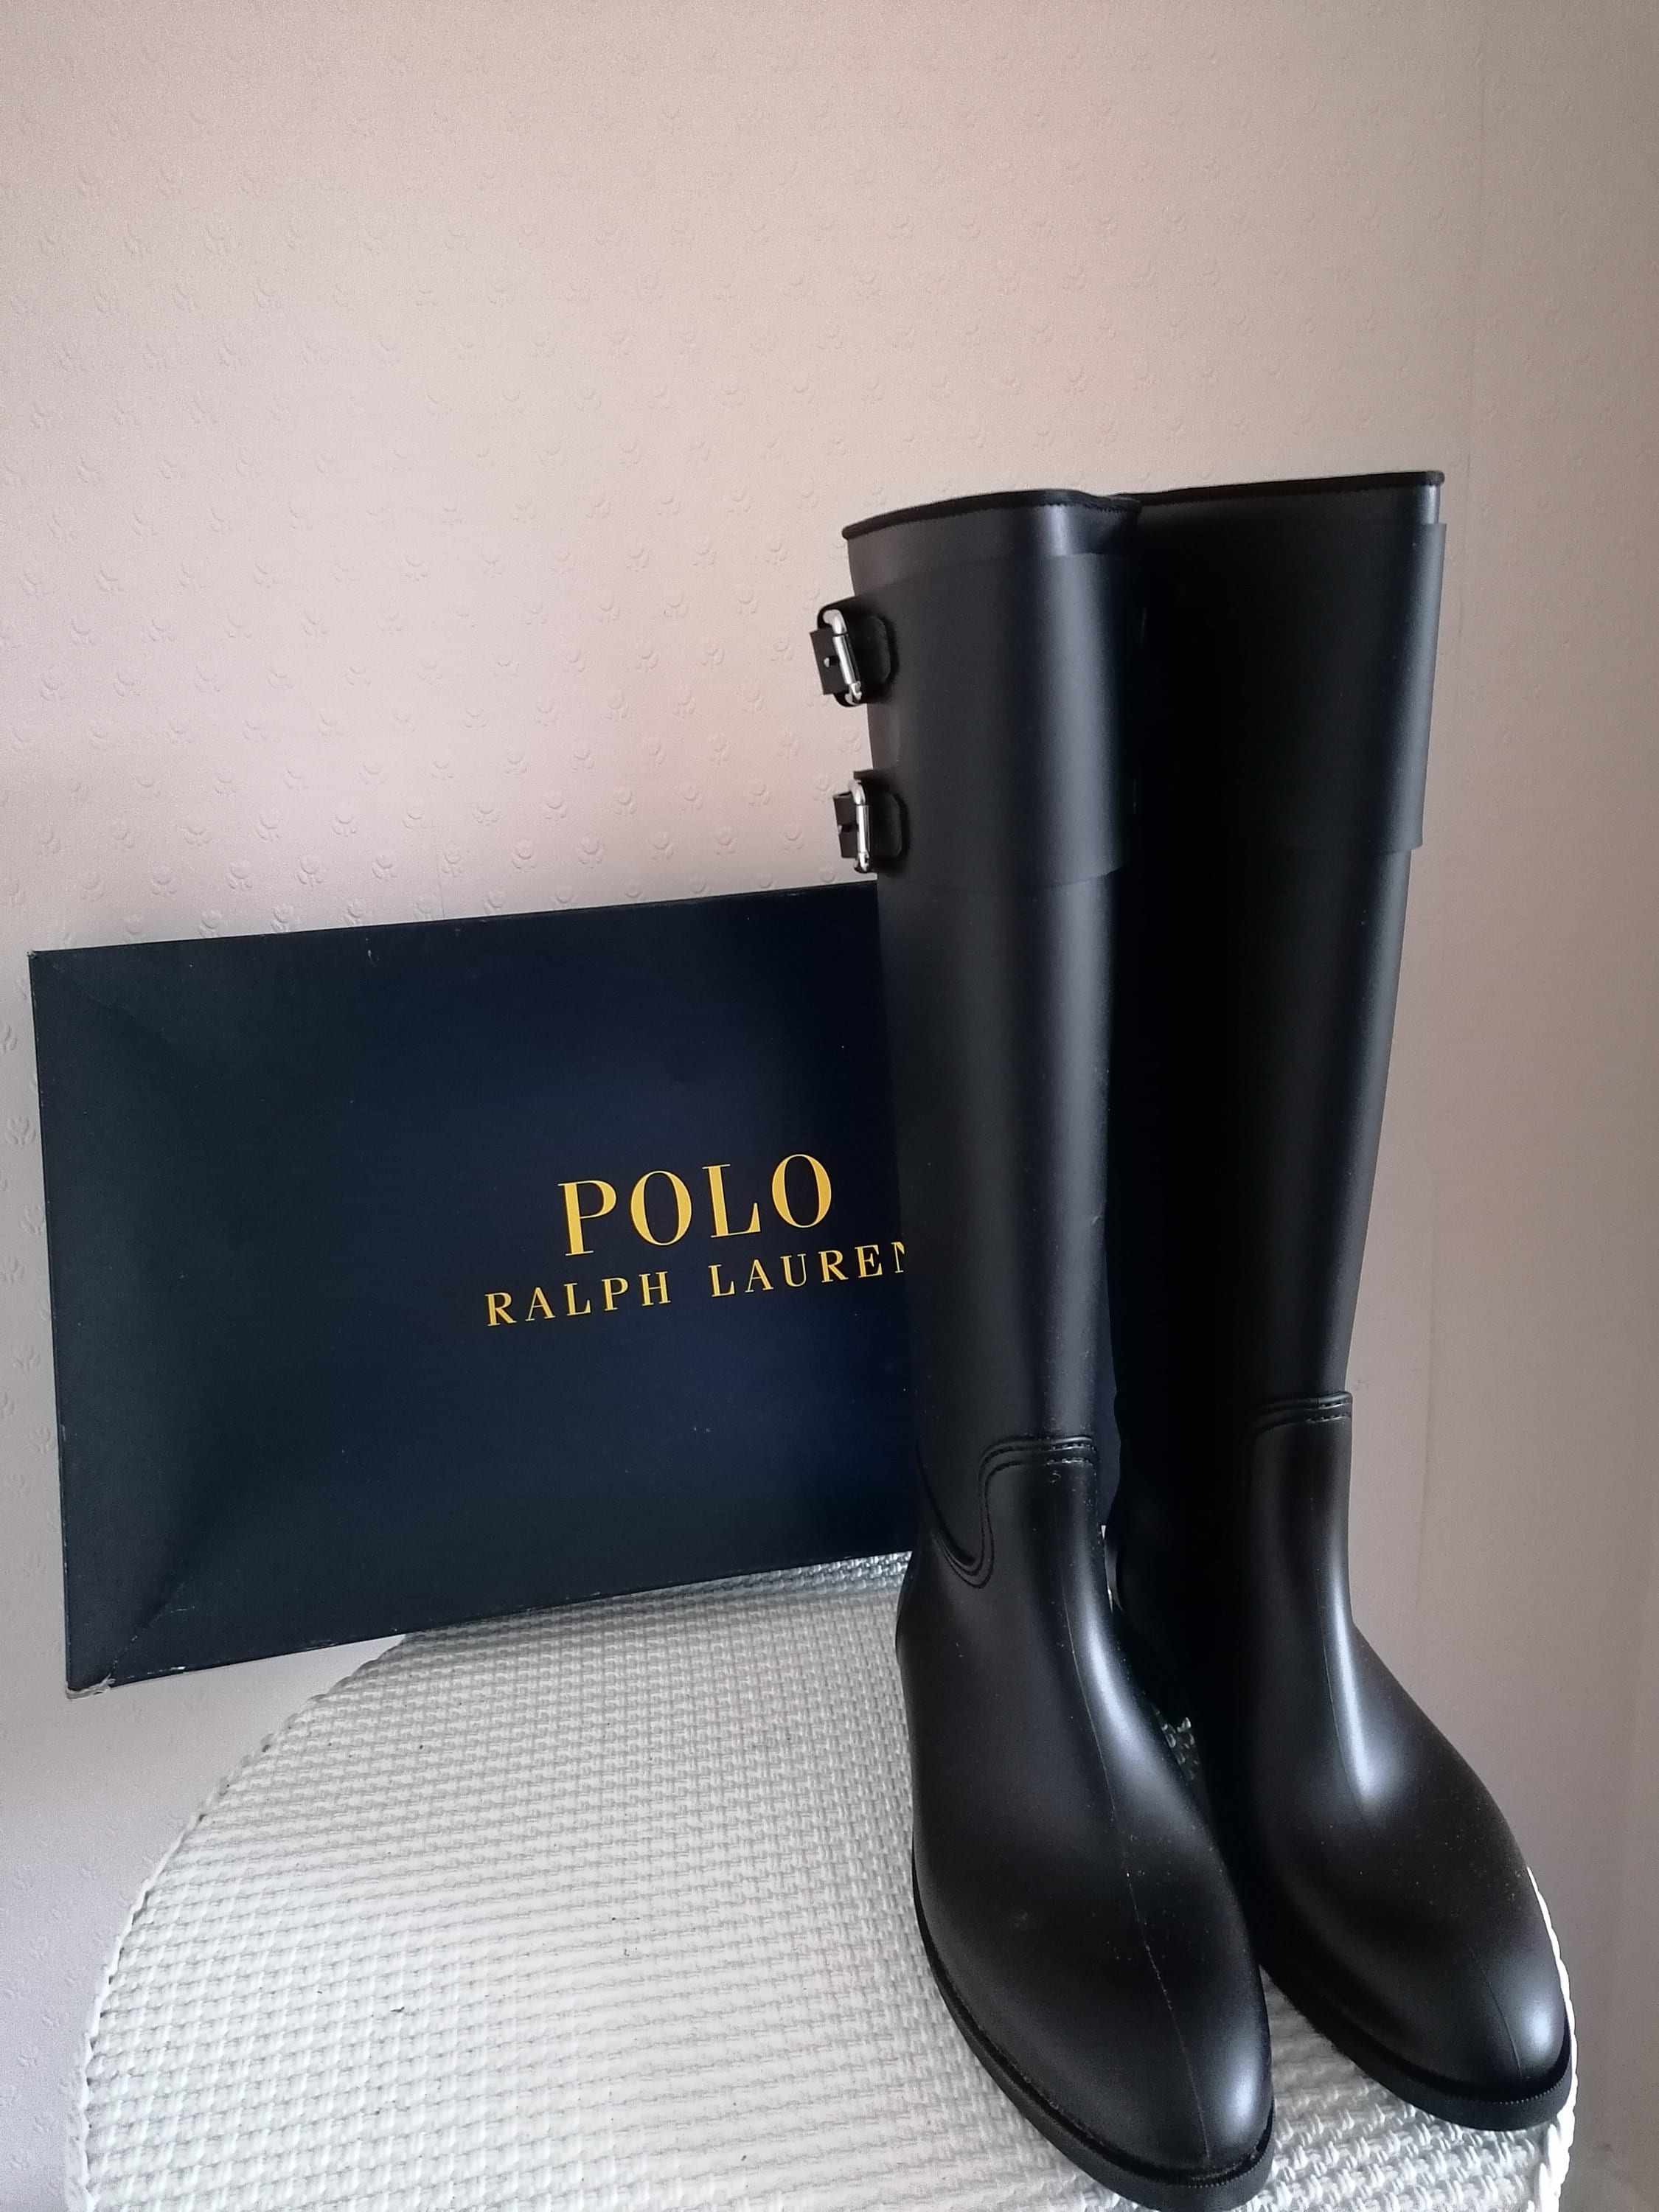 Designer Polo Ralph Lauren Rubber Riding Boots. Made in Italy. - Etsy